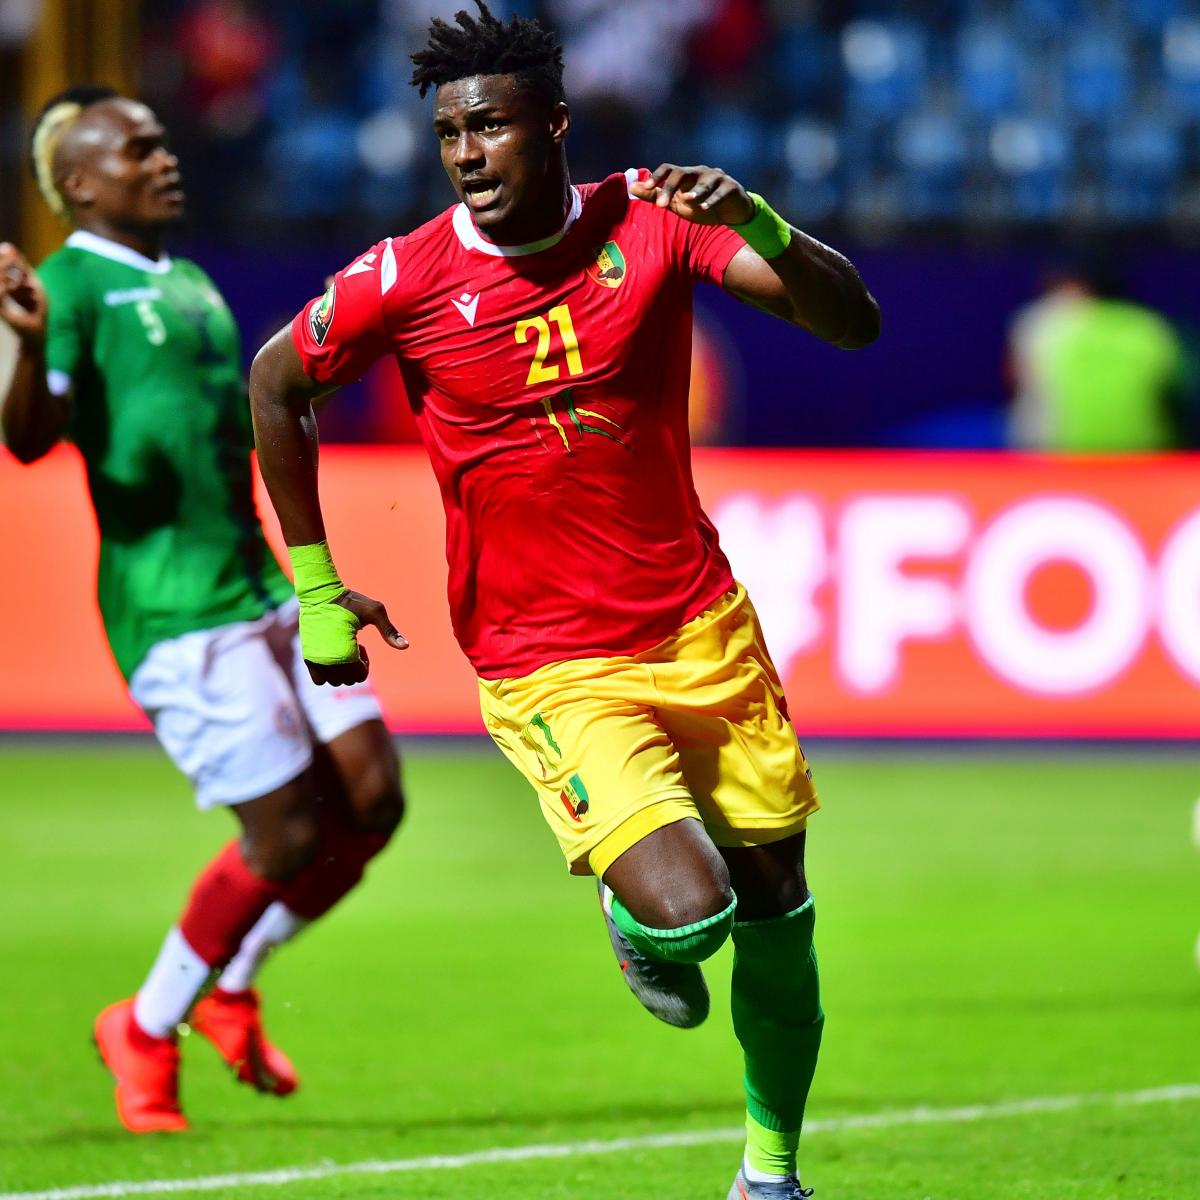 AFCON 2019: Saturday Scores, Results, Standings and Updated Schedule